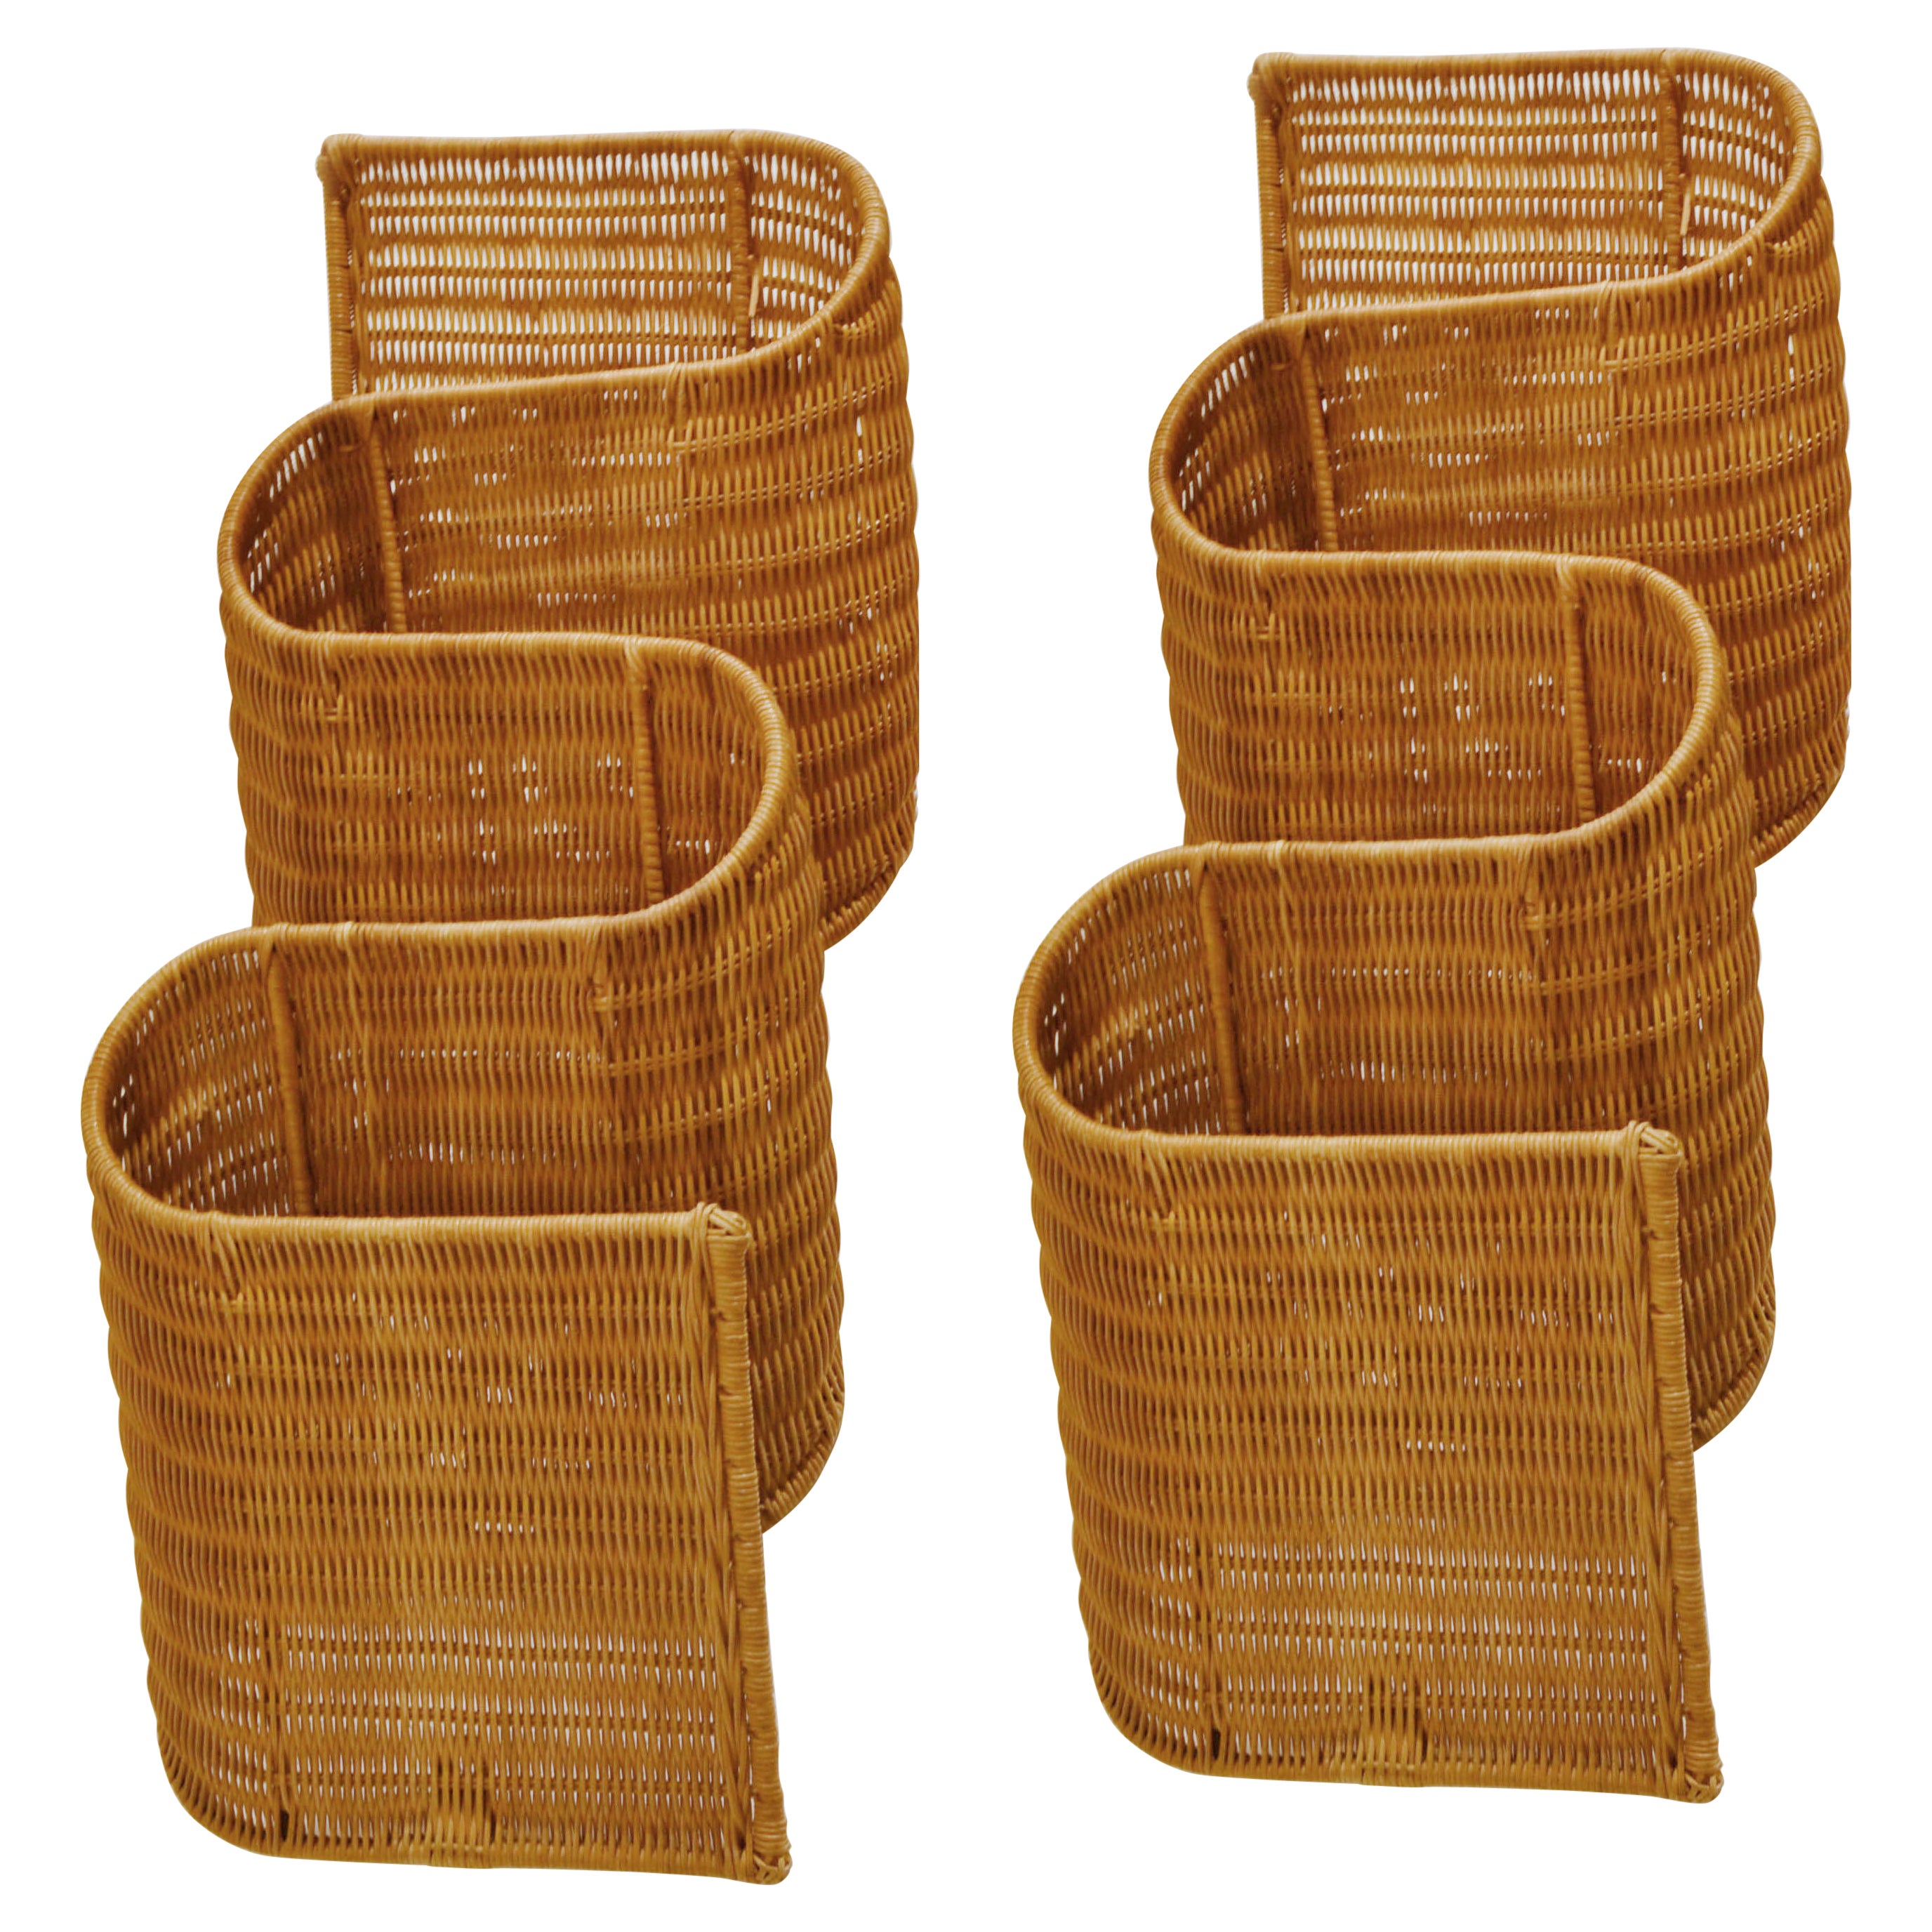 Pair of Wall Mounted Rattan Magazine Racks, Italy, 1970s For Sale